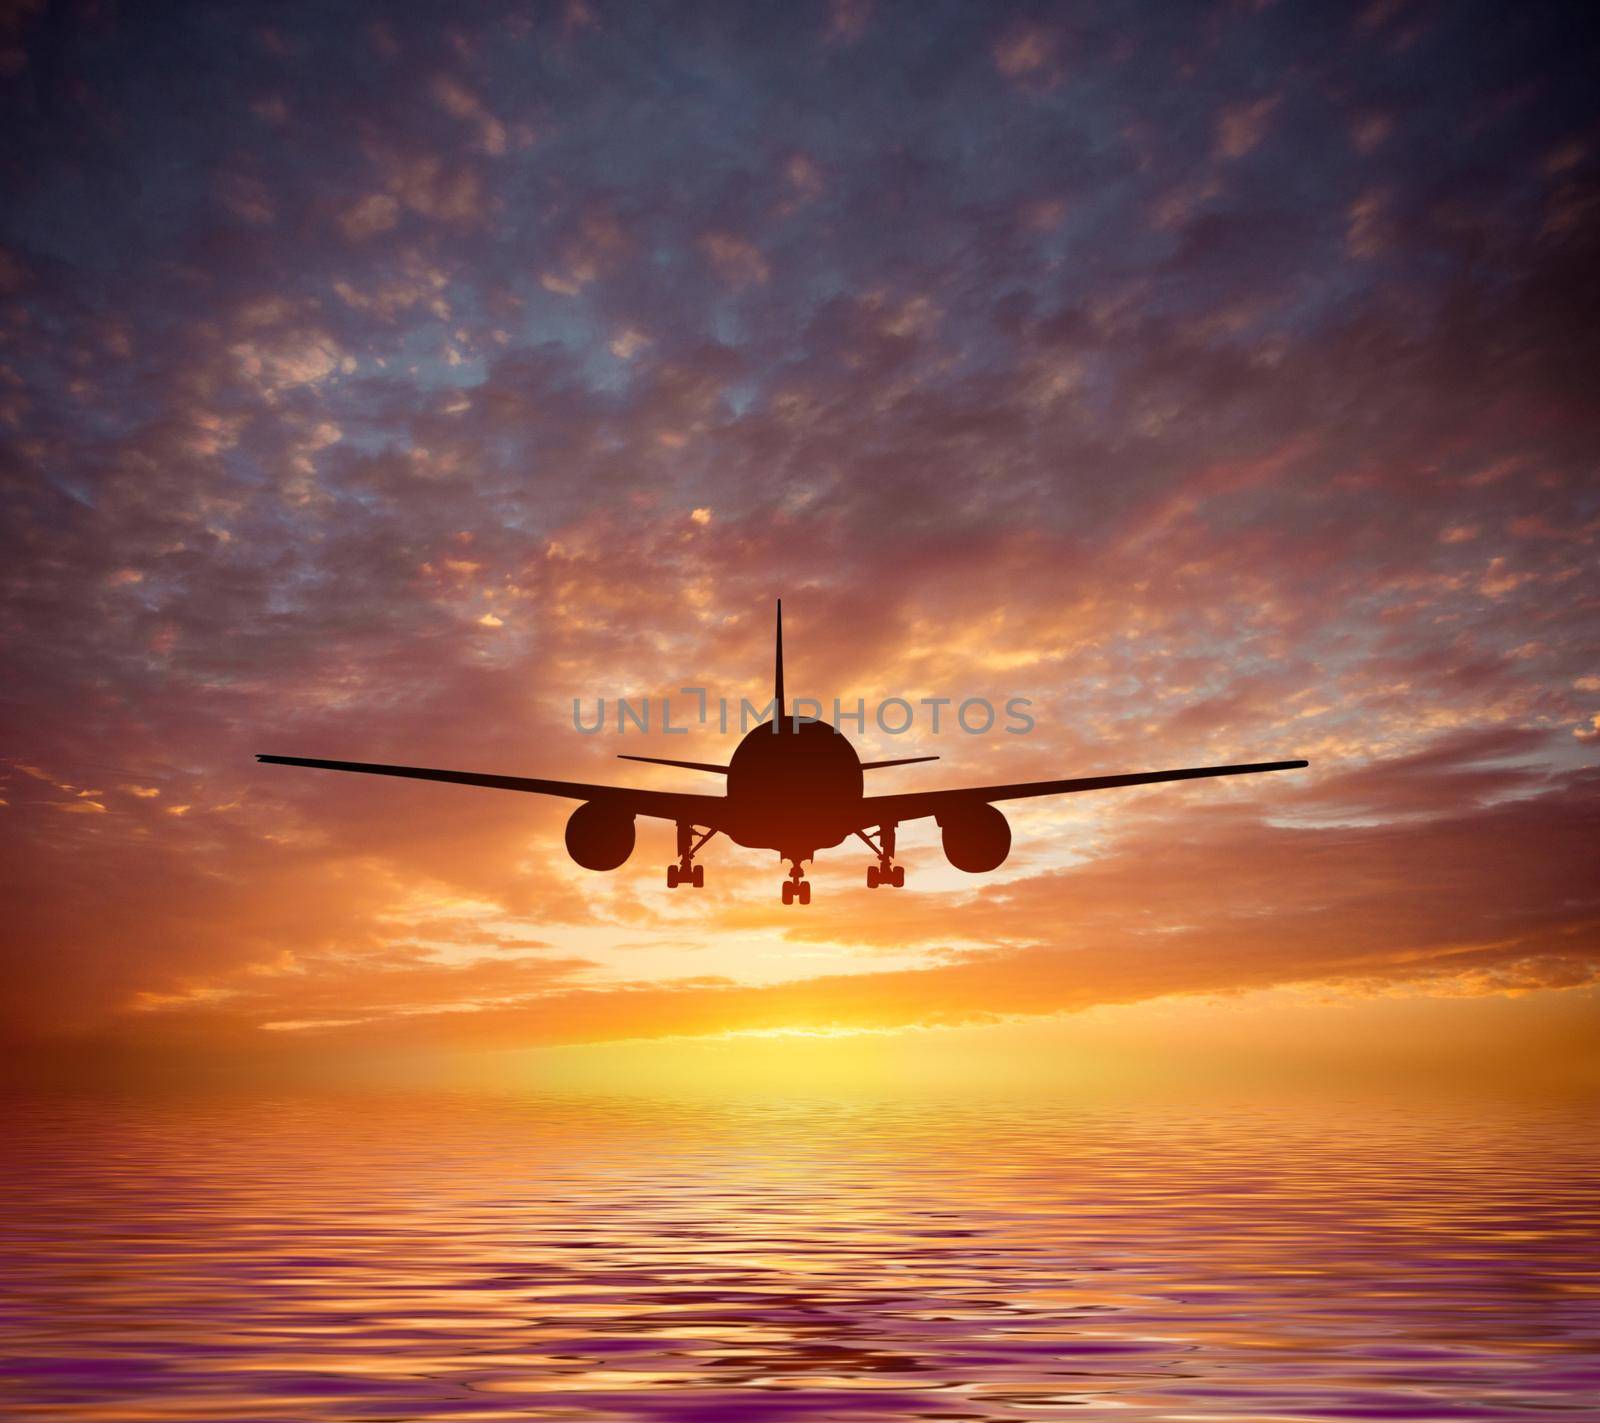 aircraft flies over the ocean on a background of a magnificent sunset